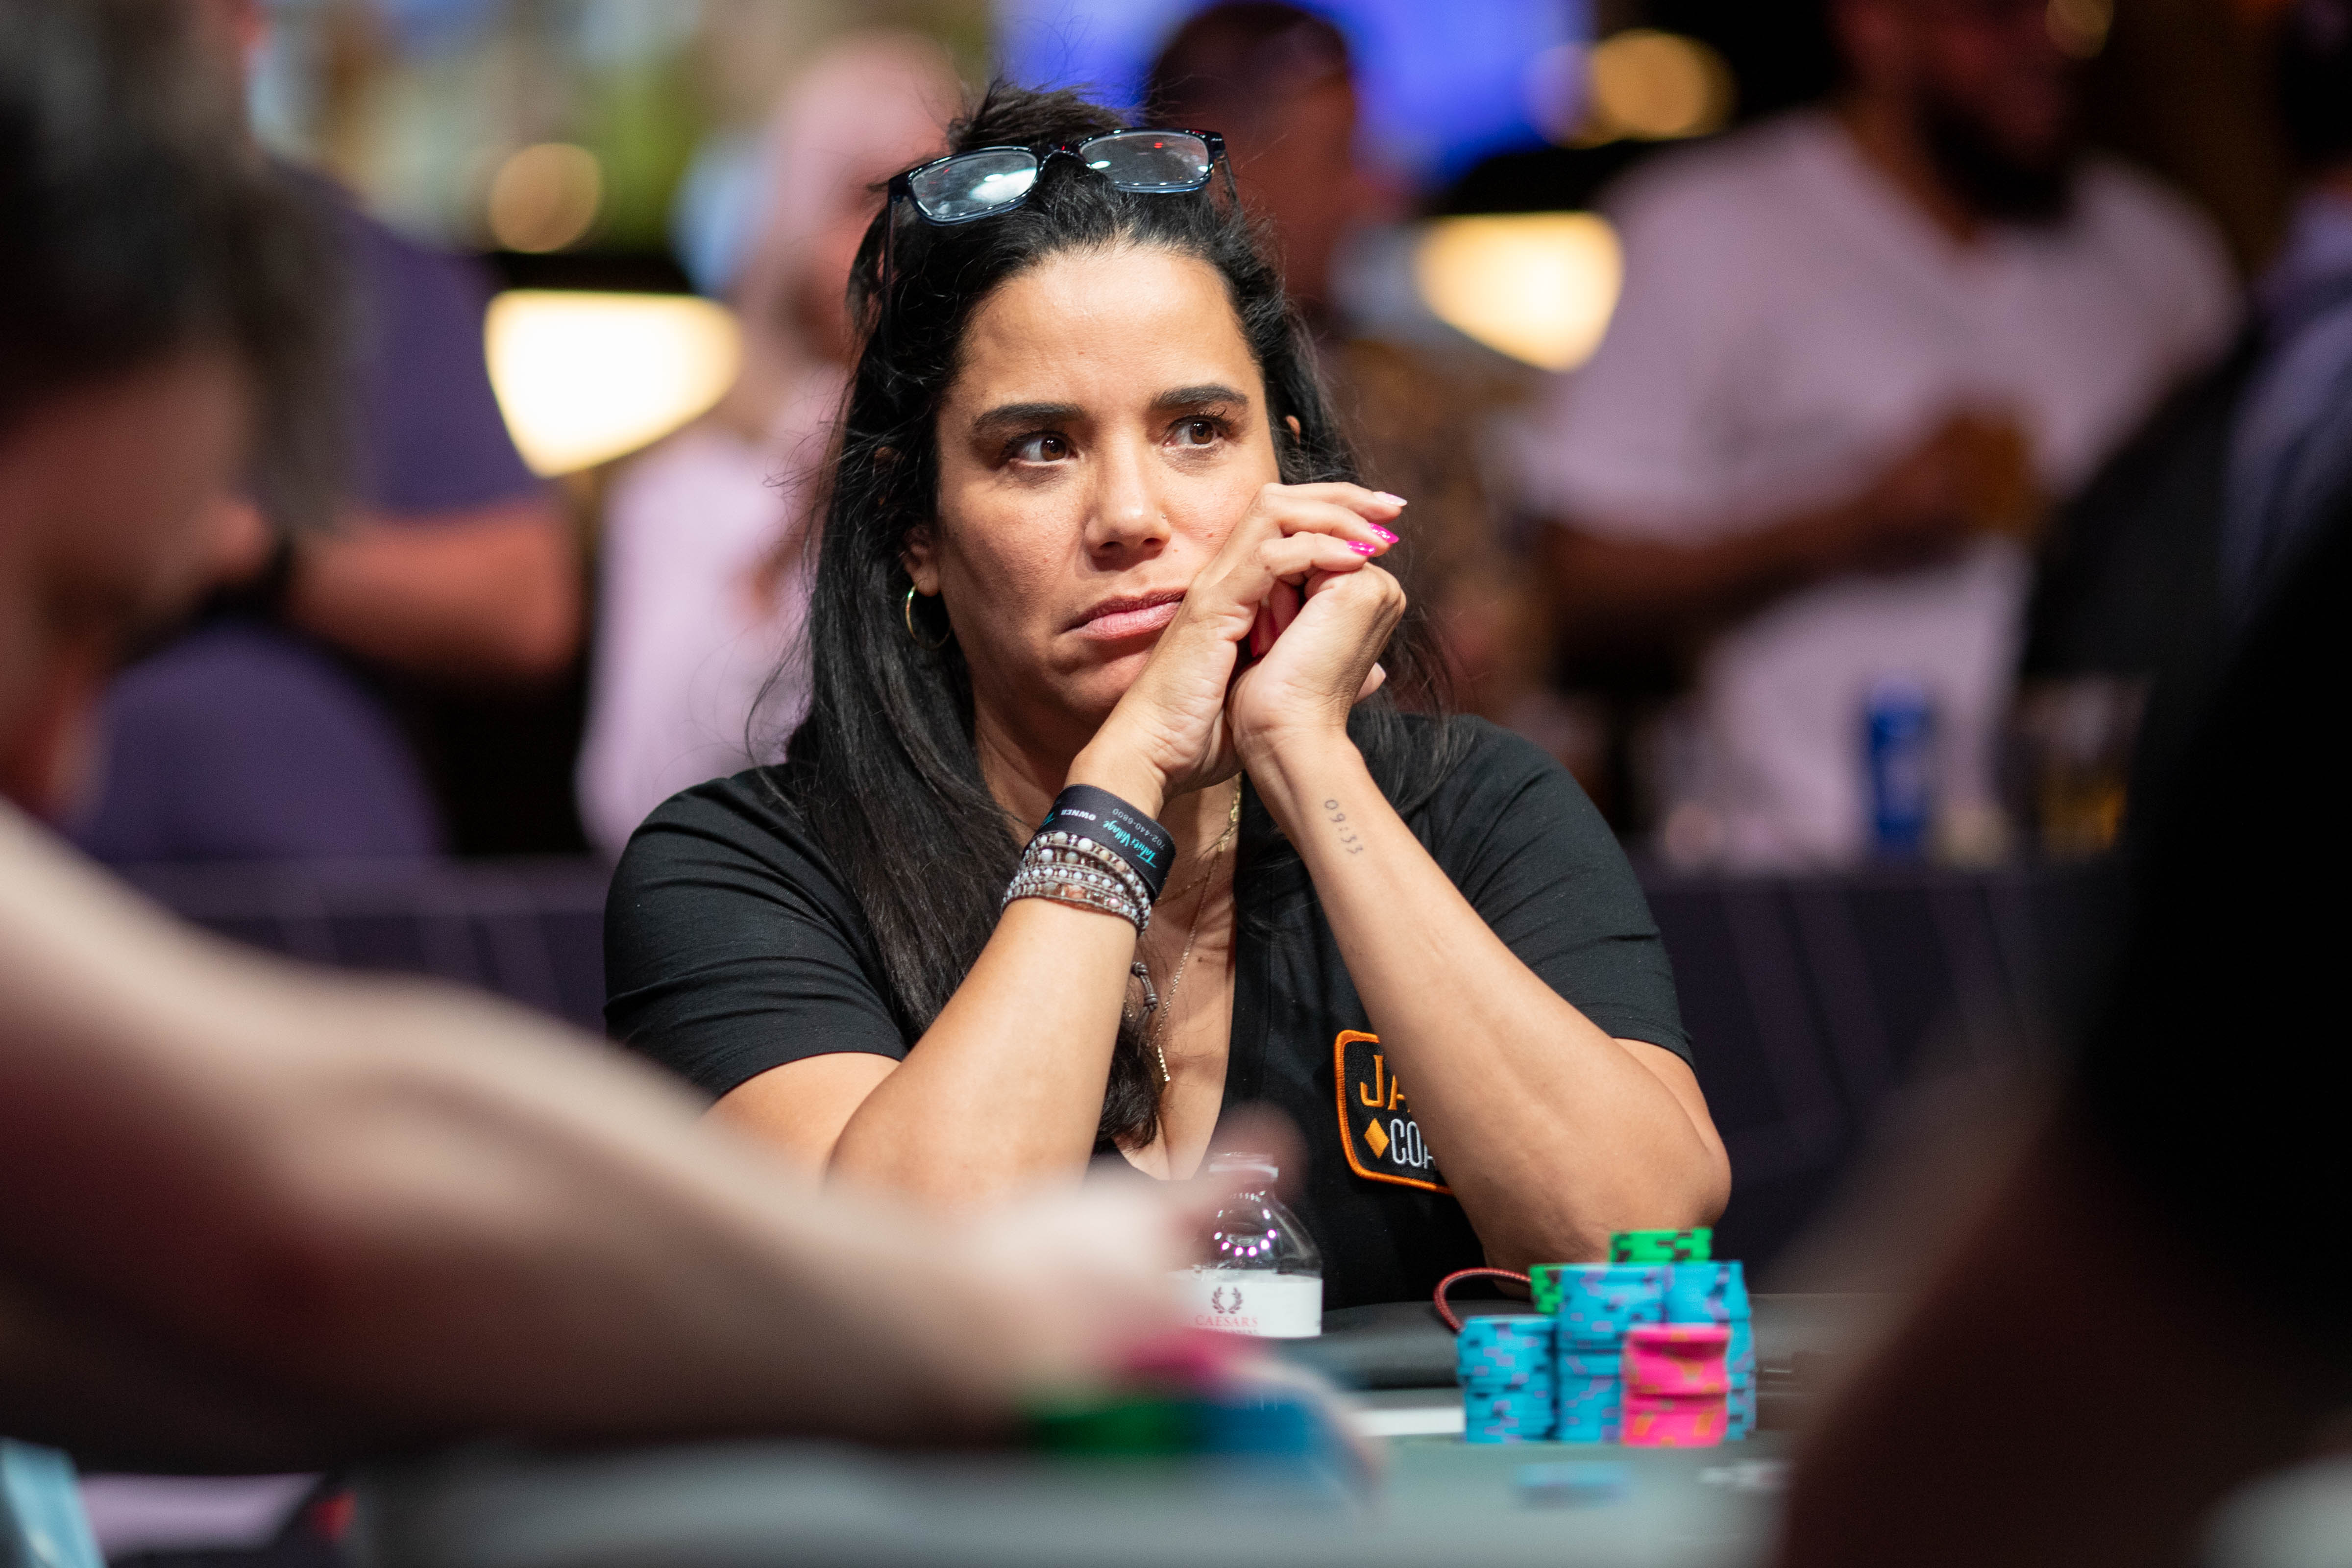 WSOP: Alexandra Botez eliminated from Main Event in painful hand, Poker